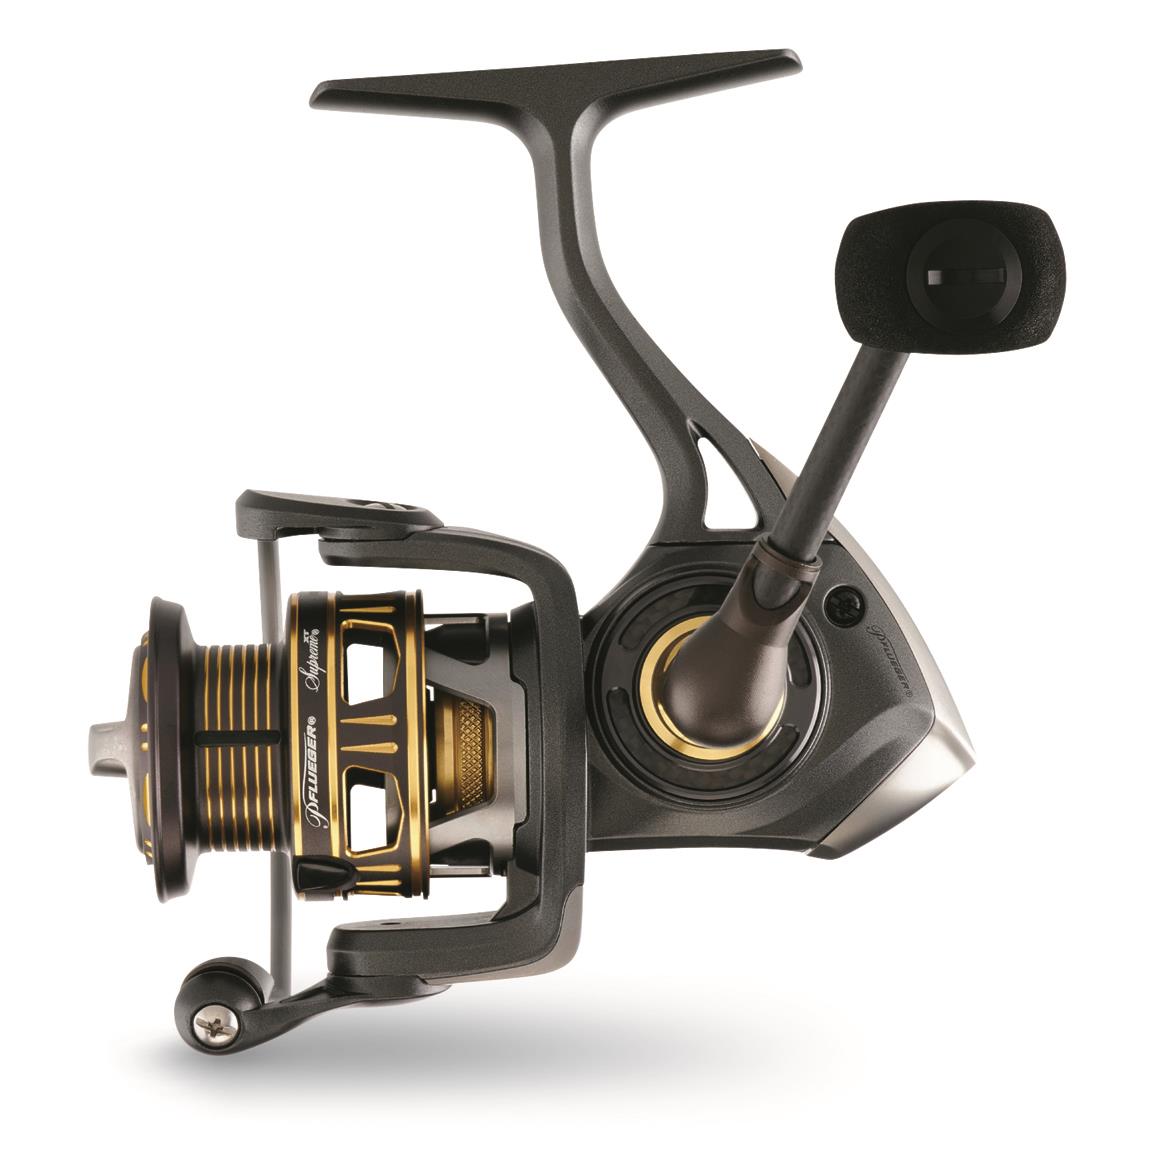 Plueger Supreme XT Spinning Reel, Size 25, 5.2:1 Gear Ratio